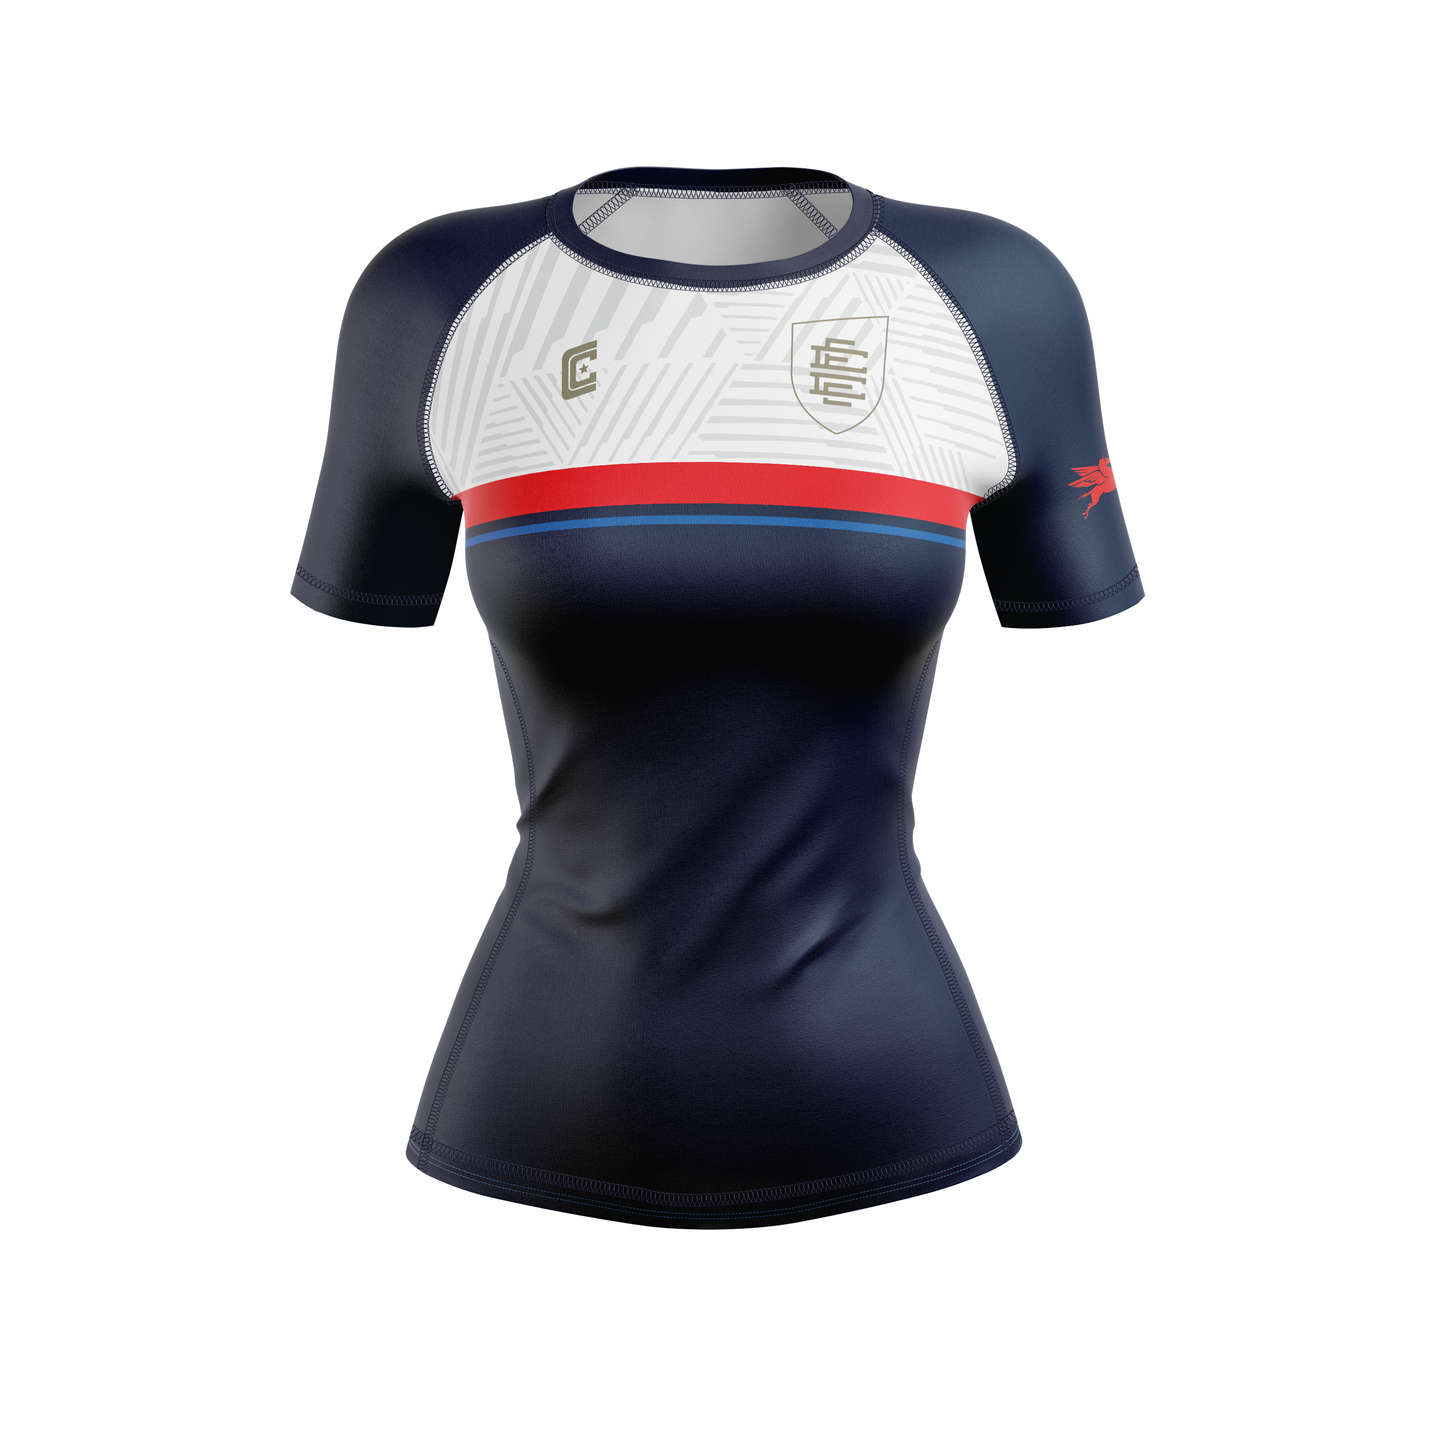 CCFC women's rash guard Enforcers, navy with red and white